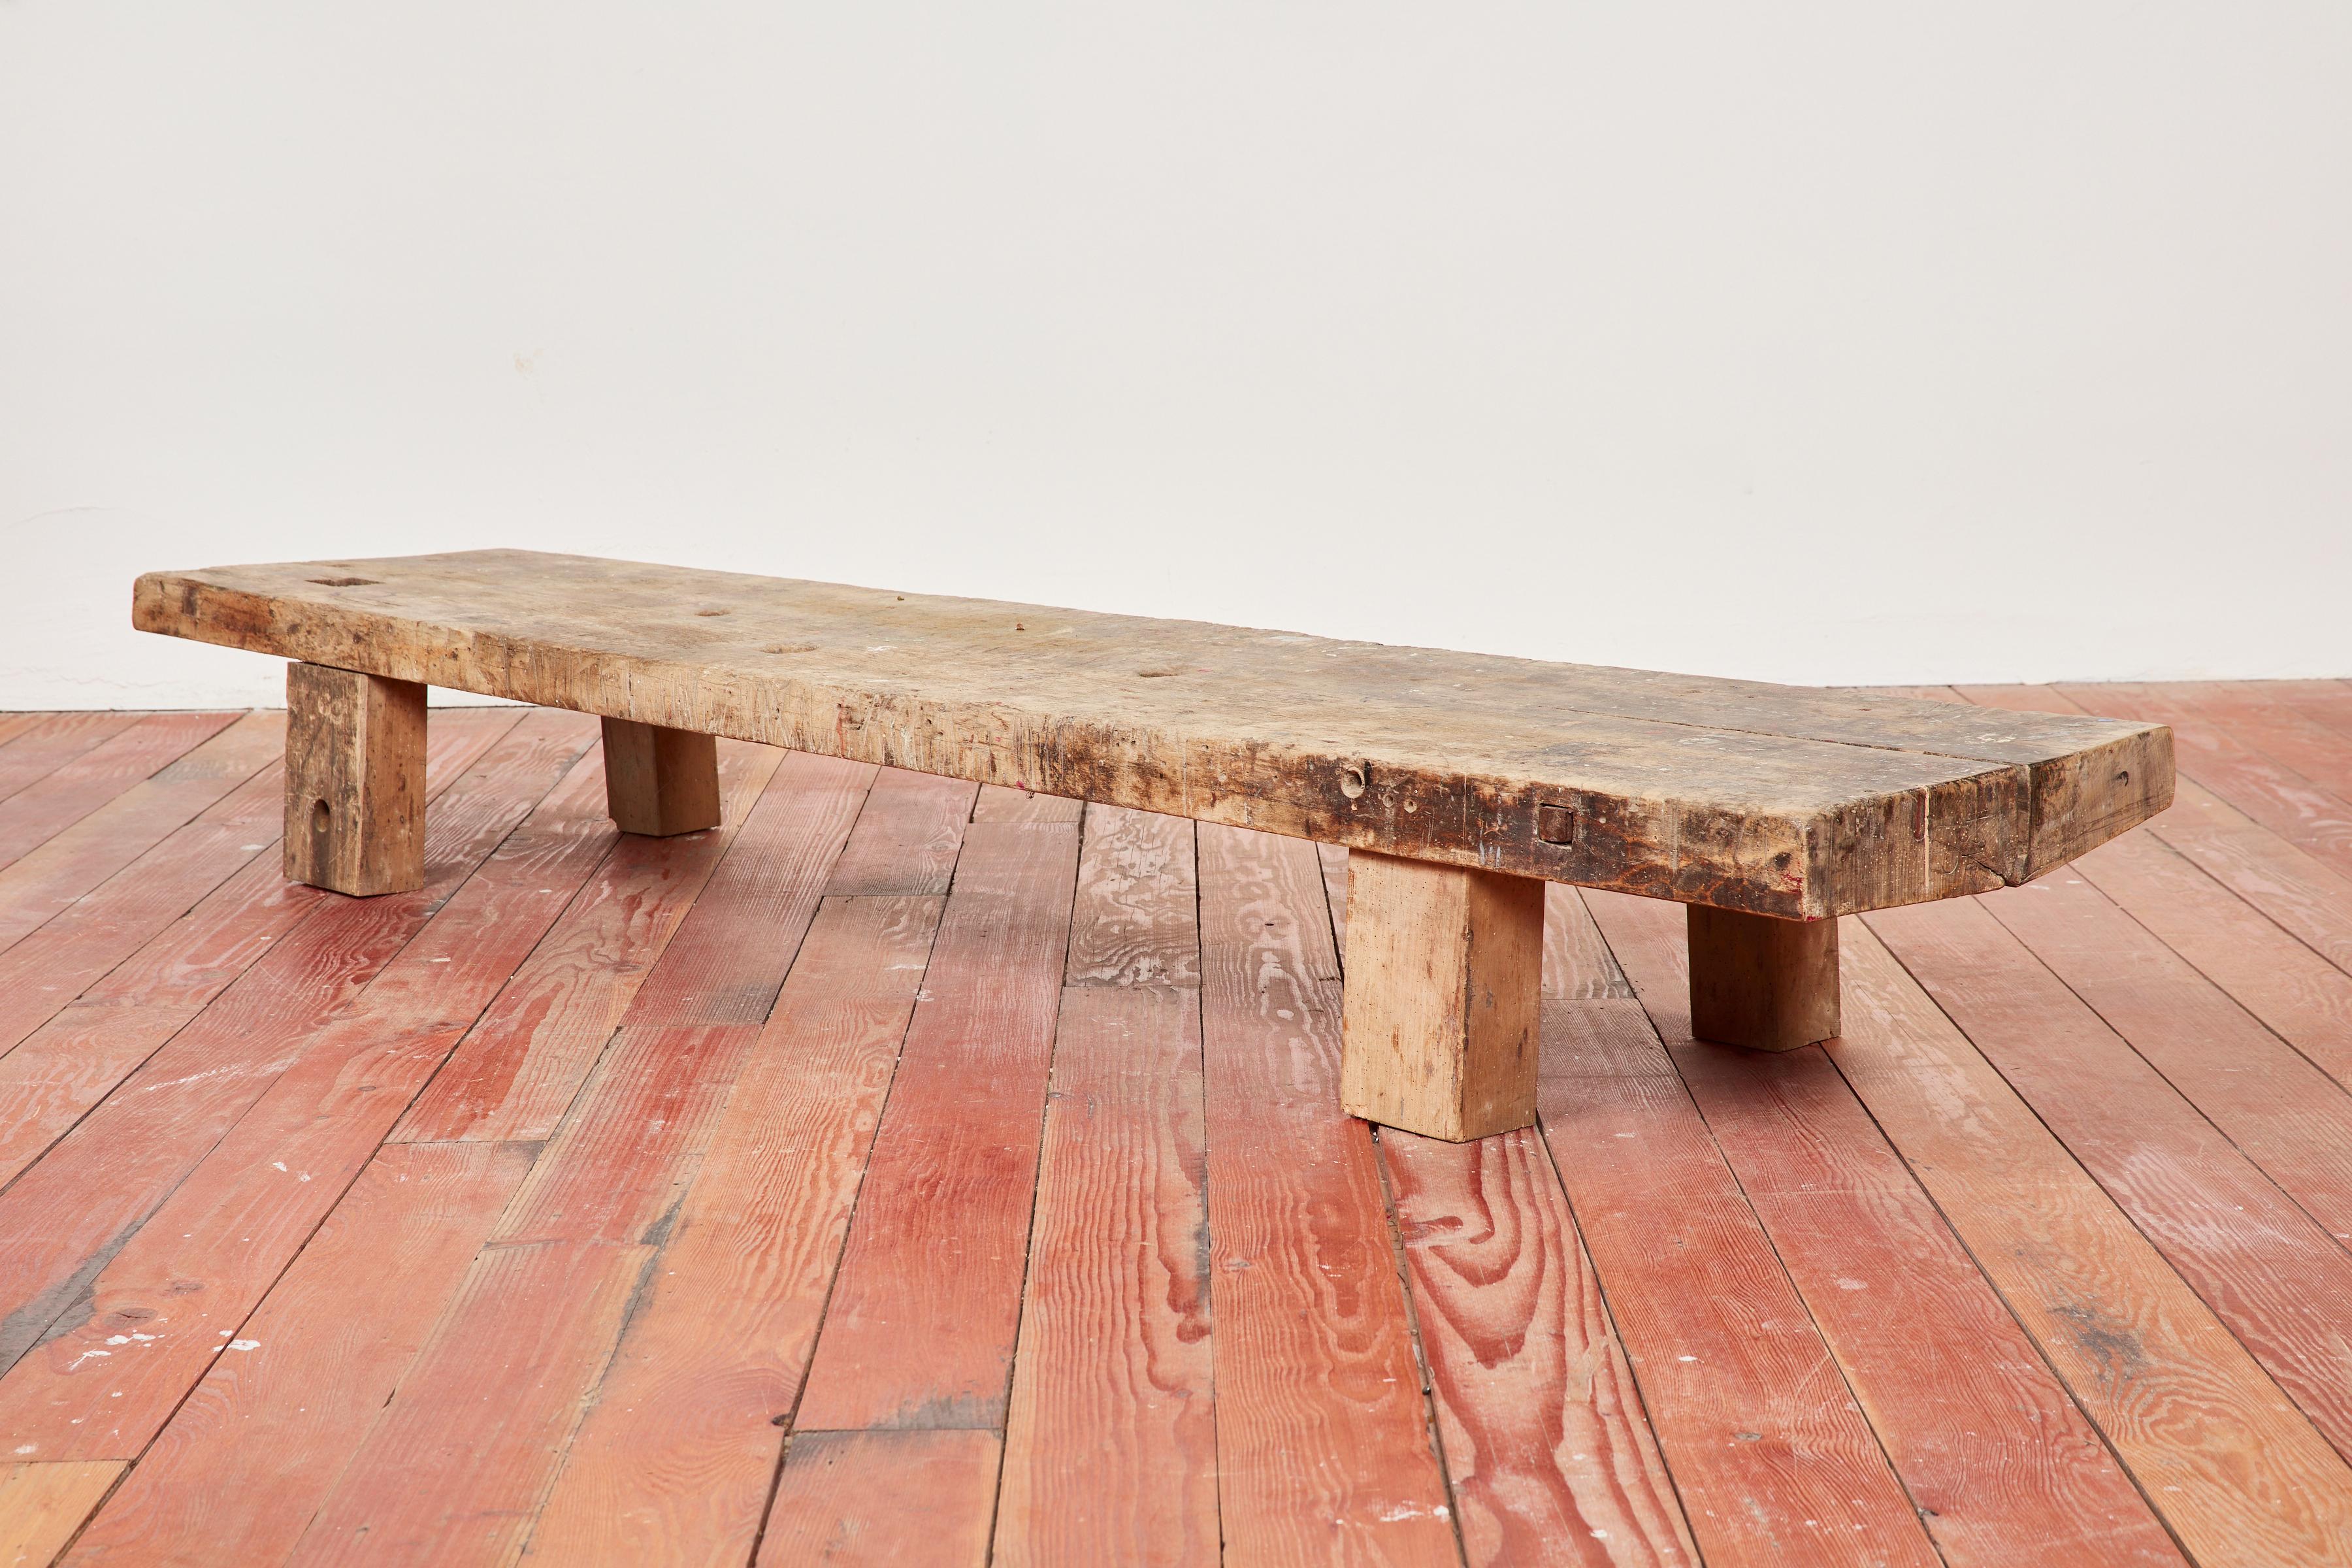 French primitive bench with wonderful patina and character
Solid and impressive in size.